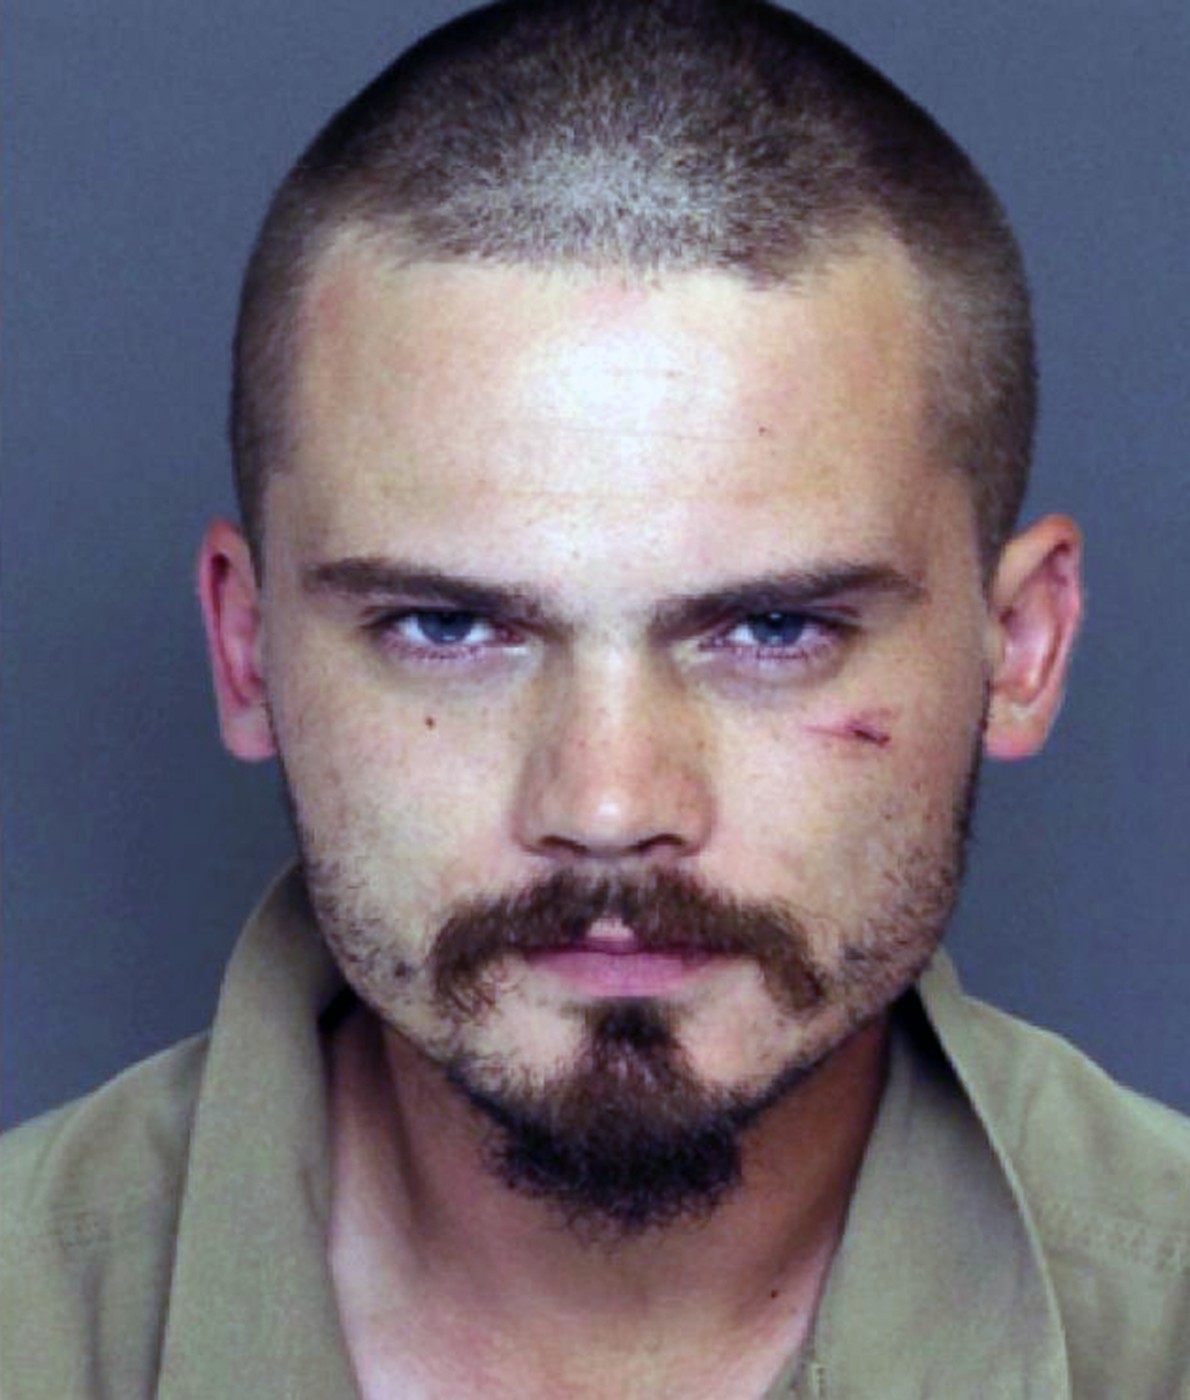 Actor Jake Lloyd arrested after high speed car chase in South Carolina, Charleston County, America Jun